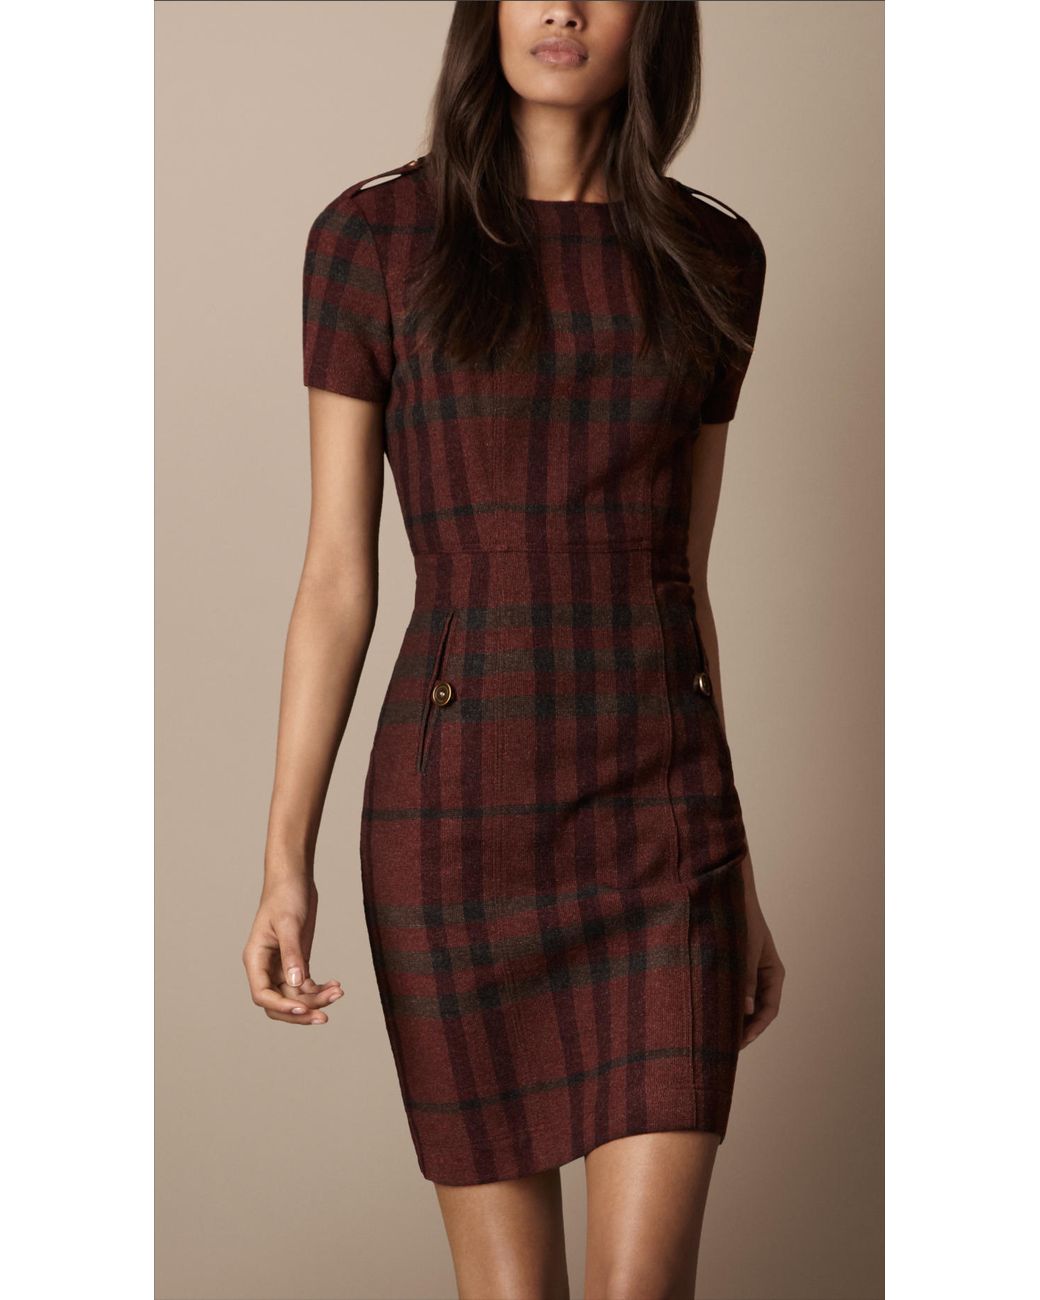 Burberry Brit Fitted Check Dress in Brown | Lyst